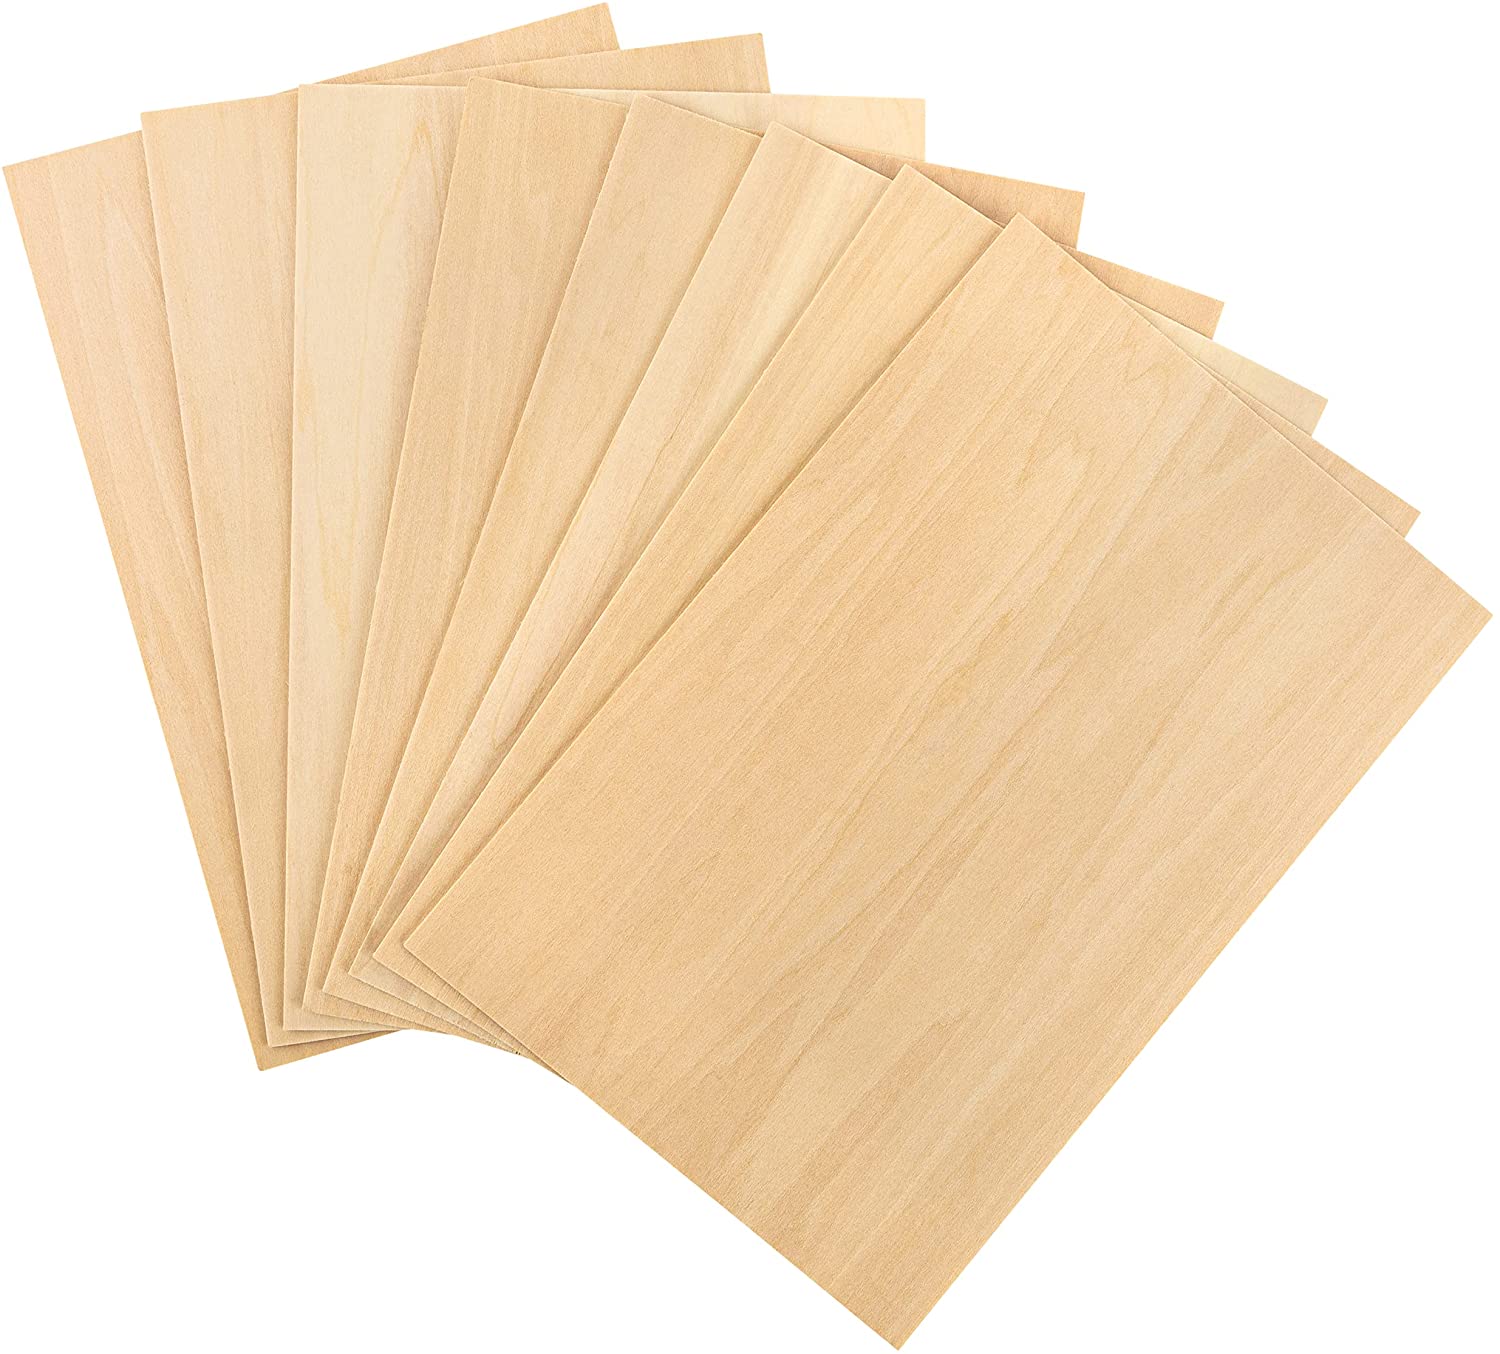 10 Pack Basswood Sheets 3mm 10 x 10 x 1/8 Inch Plywood Board, Thin  Natural